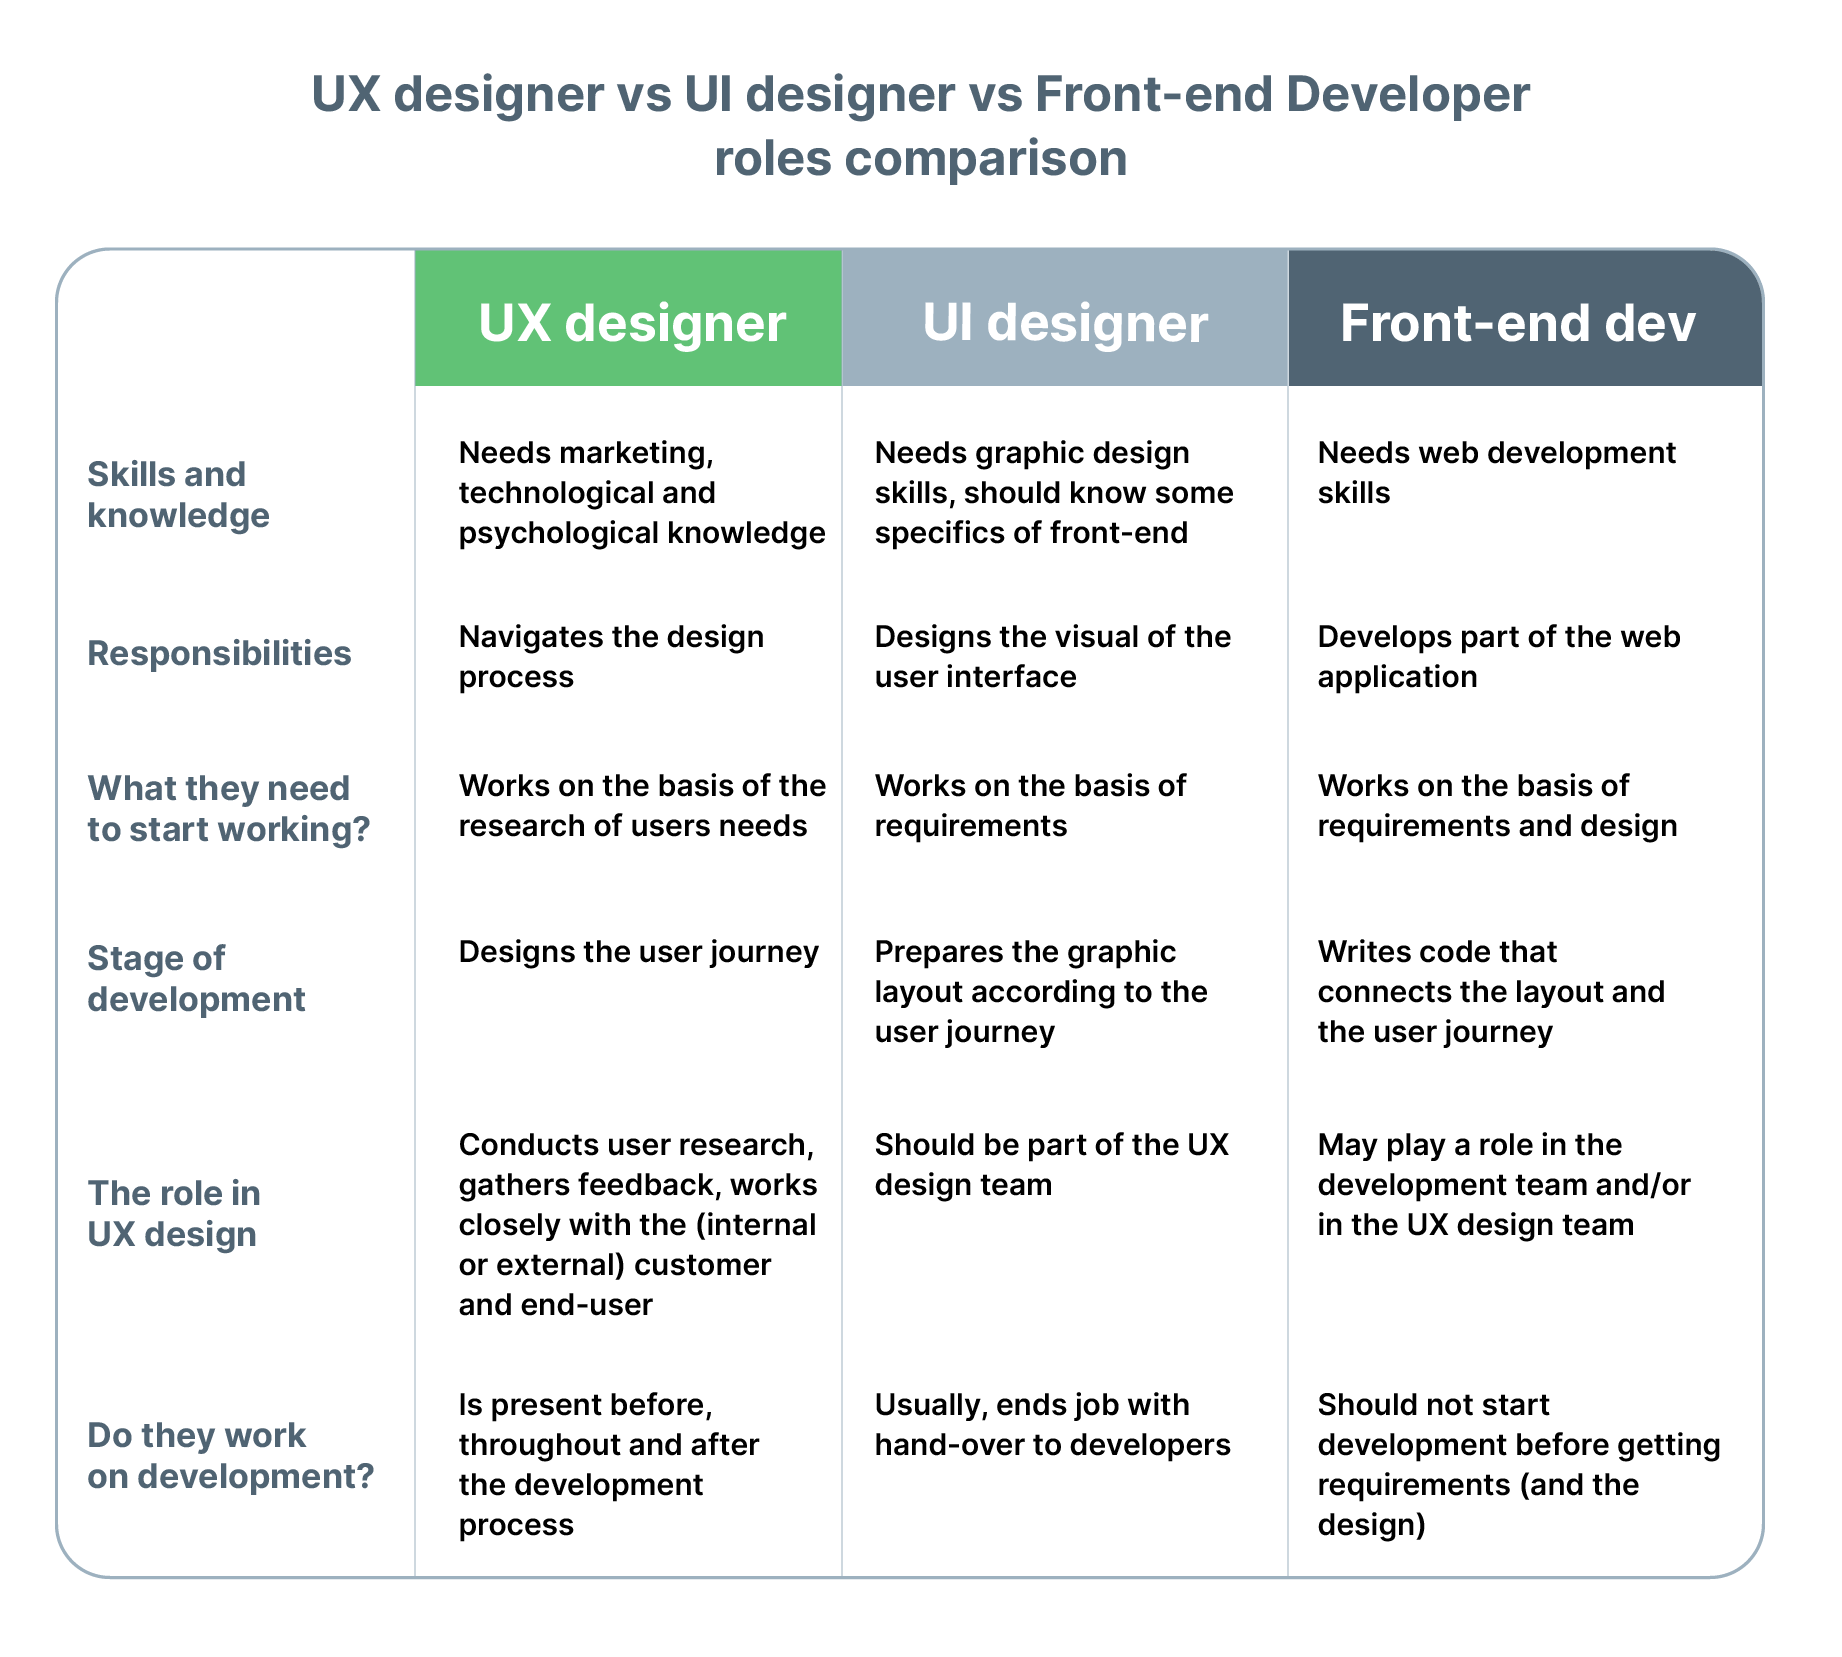 ux, ui and frontend roles comparision